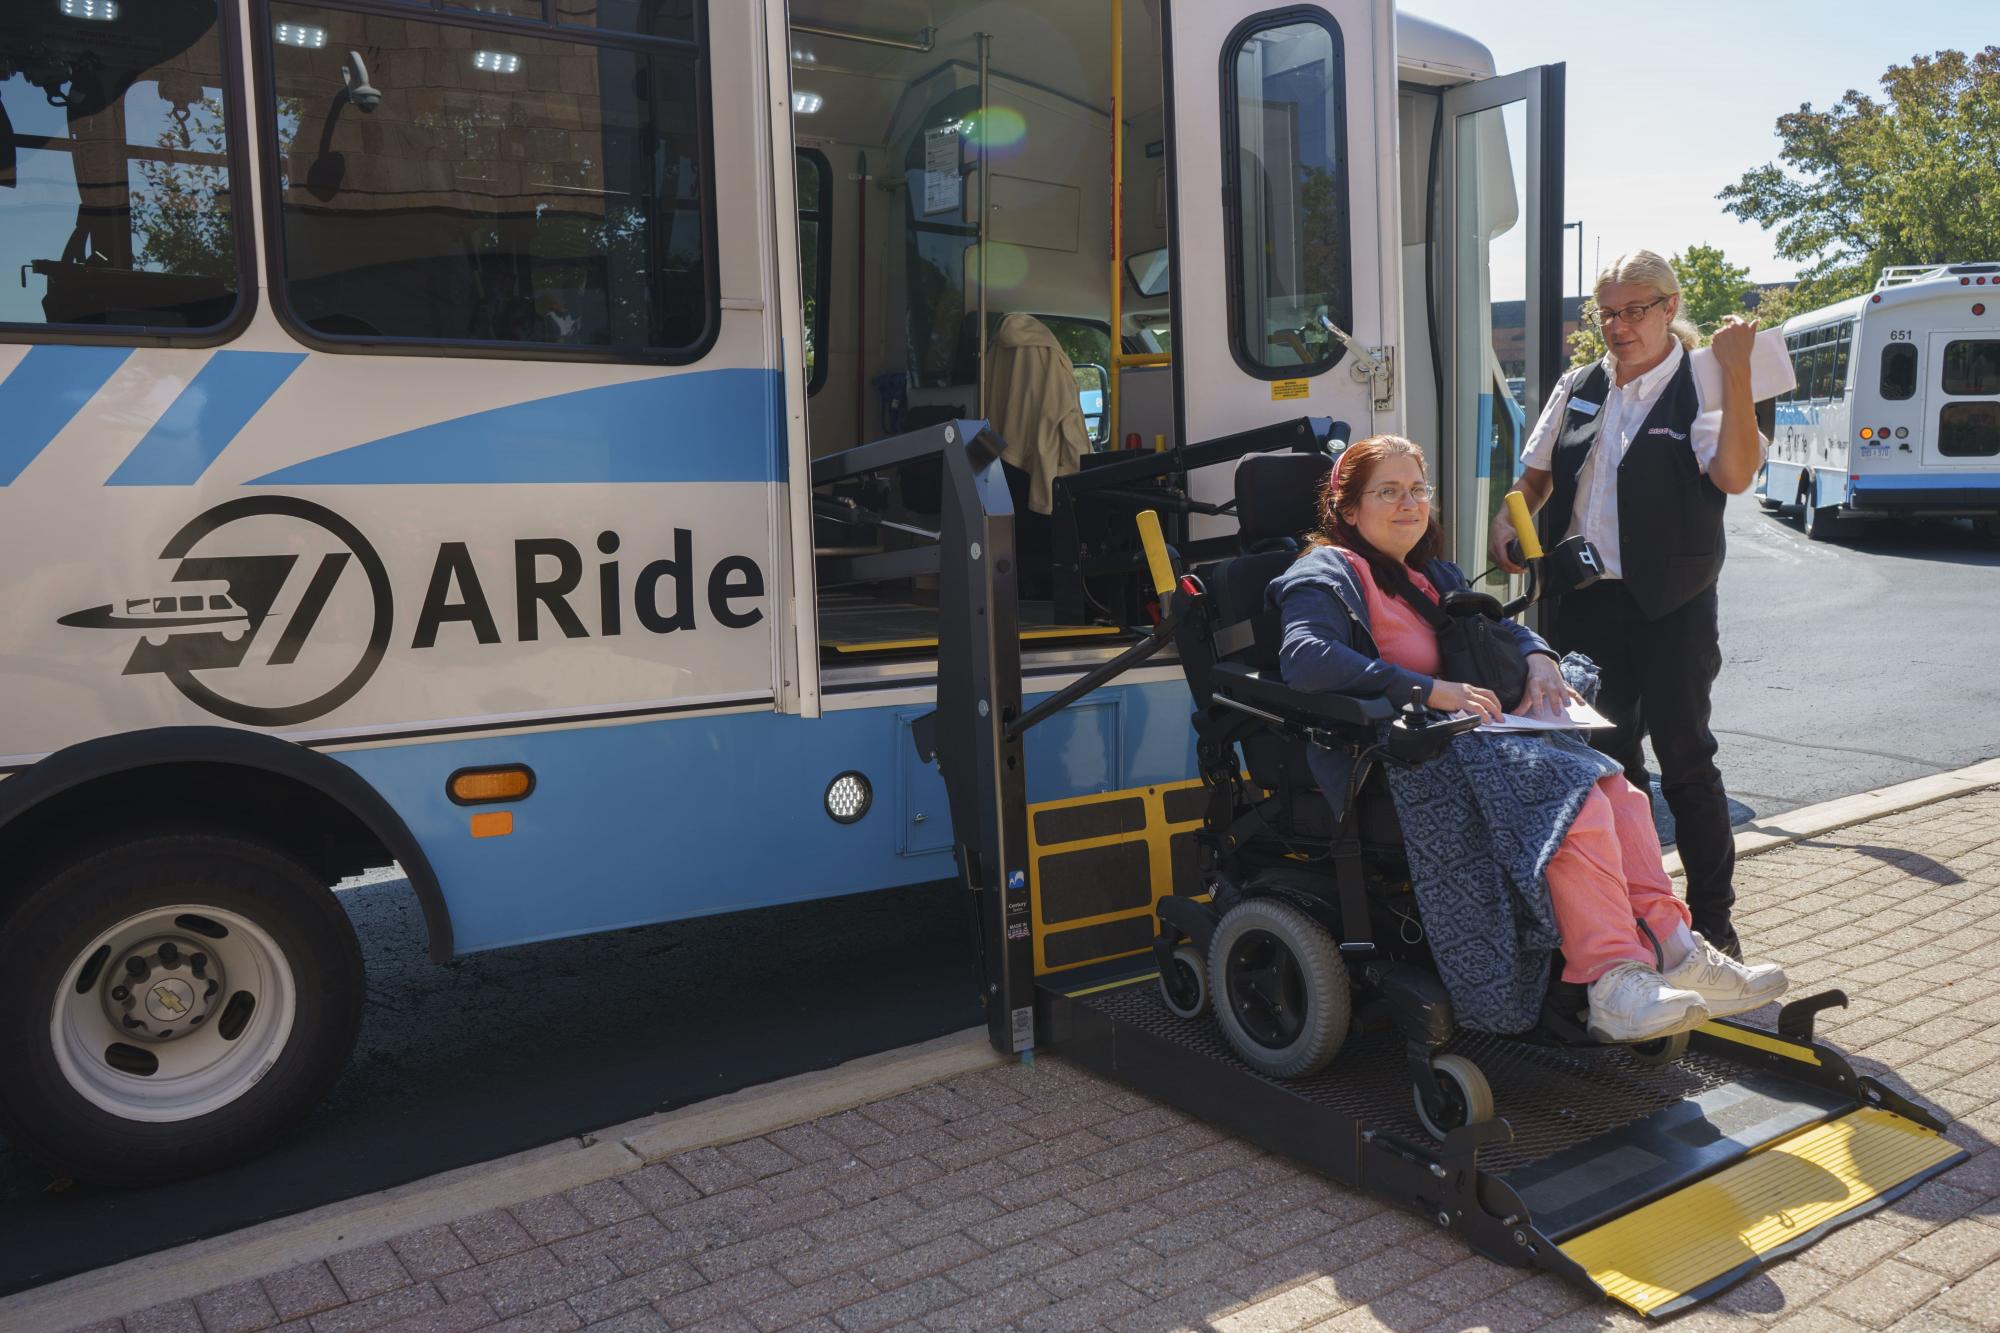 A woman has help boarding the A-Ride bus with her wheelchair.